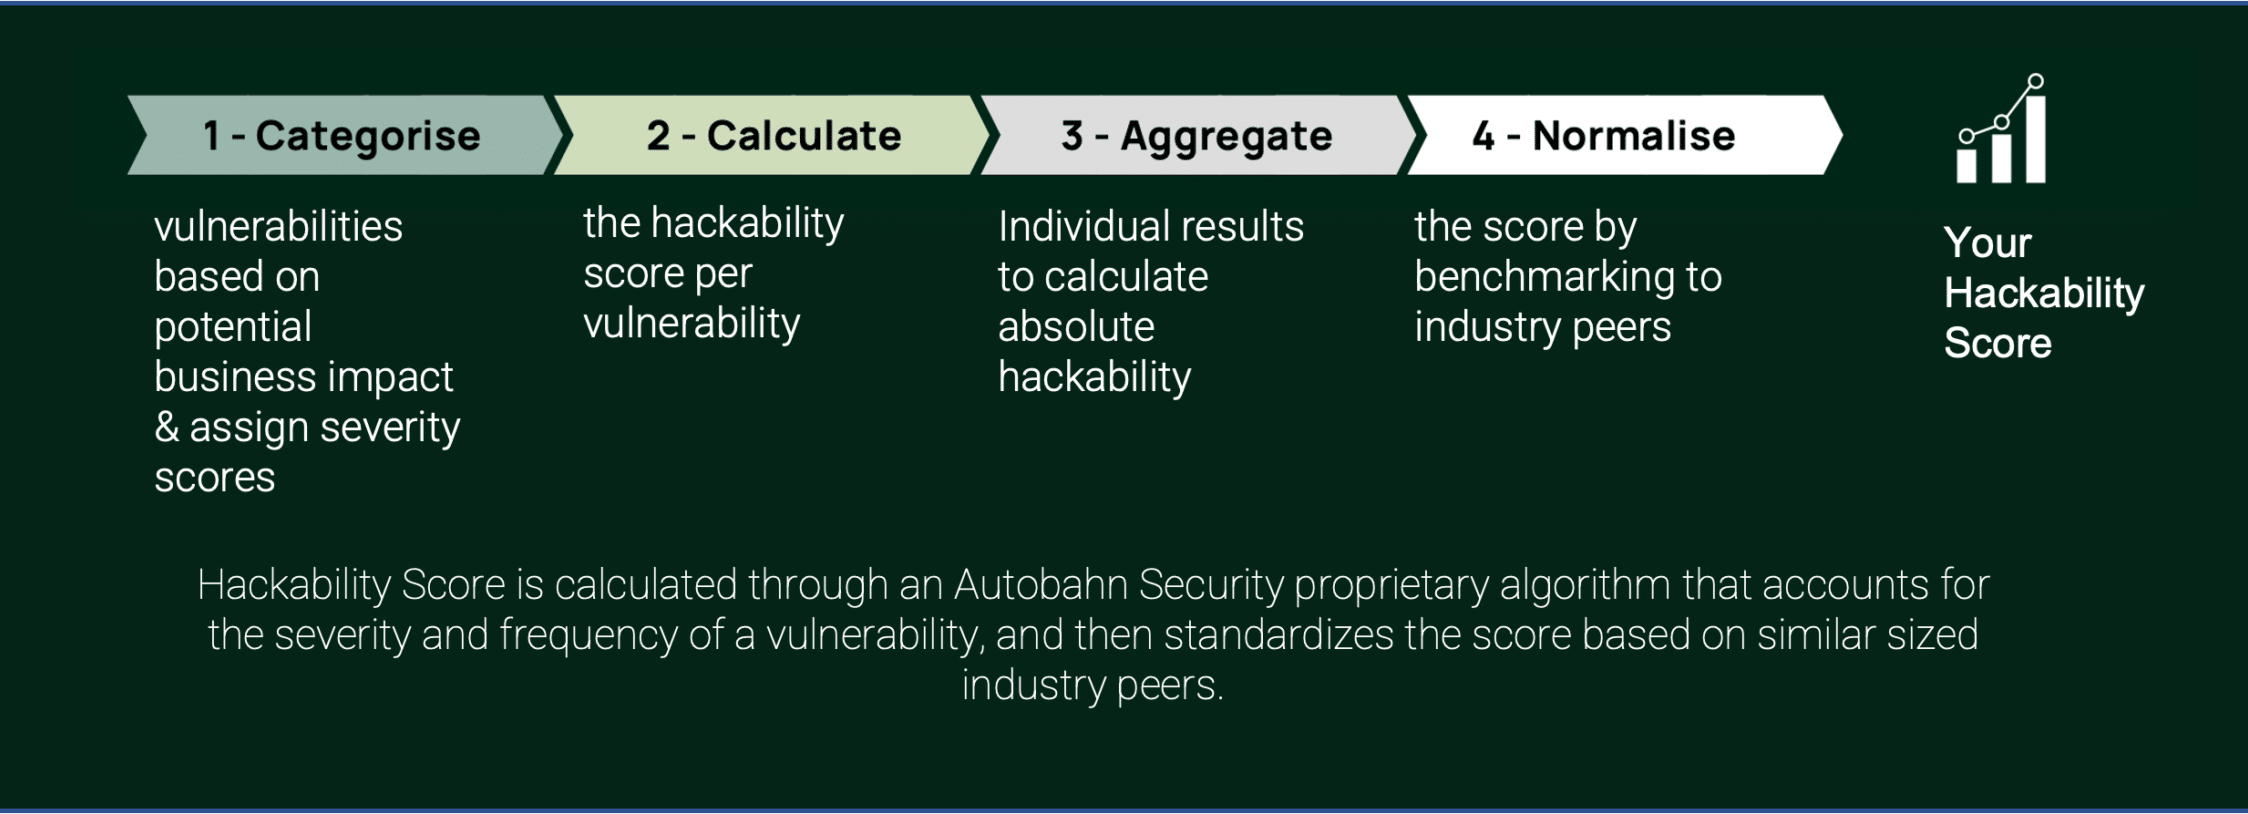 A figure showing the steps of how Autobahn Security catagorieses vulnerabilities based on potential business impact, then calculates the hackability score per vulnerability, afterwards aggregates the individual results to calculate absolute Hackability, and at the end, it normalises the score by benchmarking to industry peers